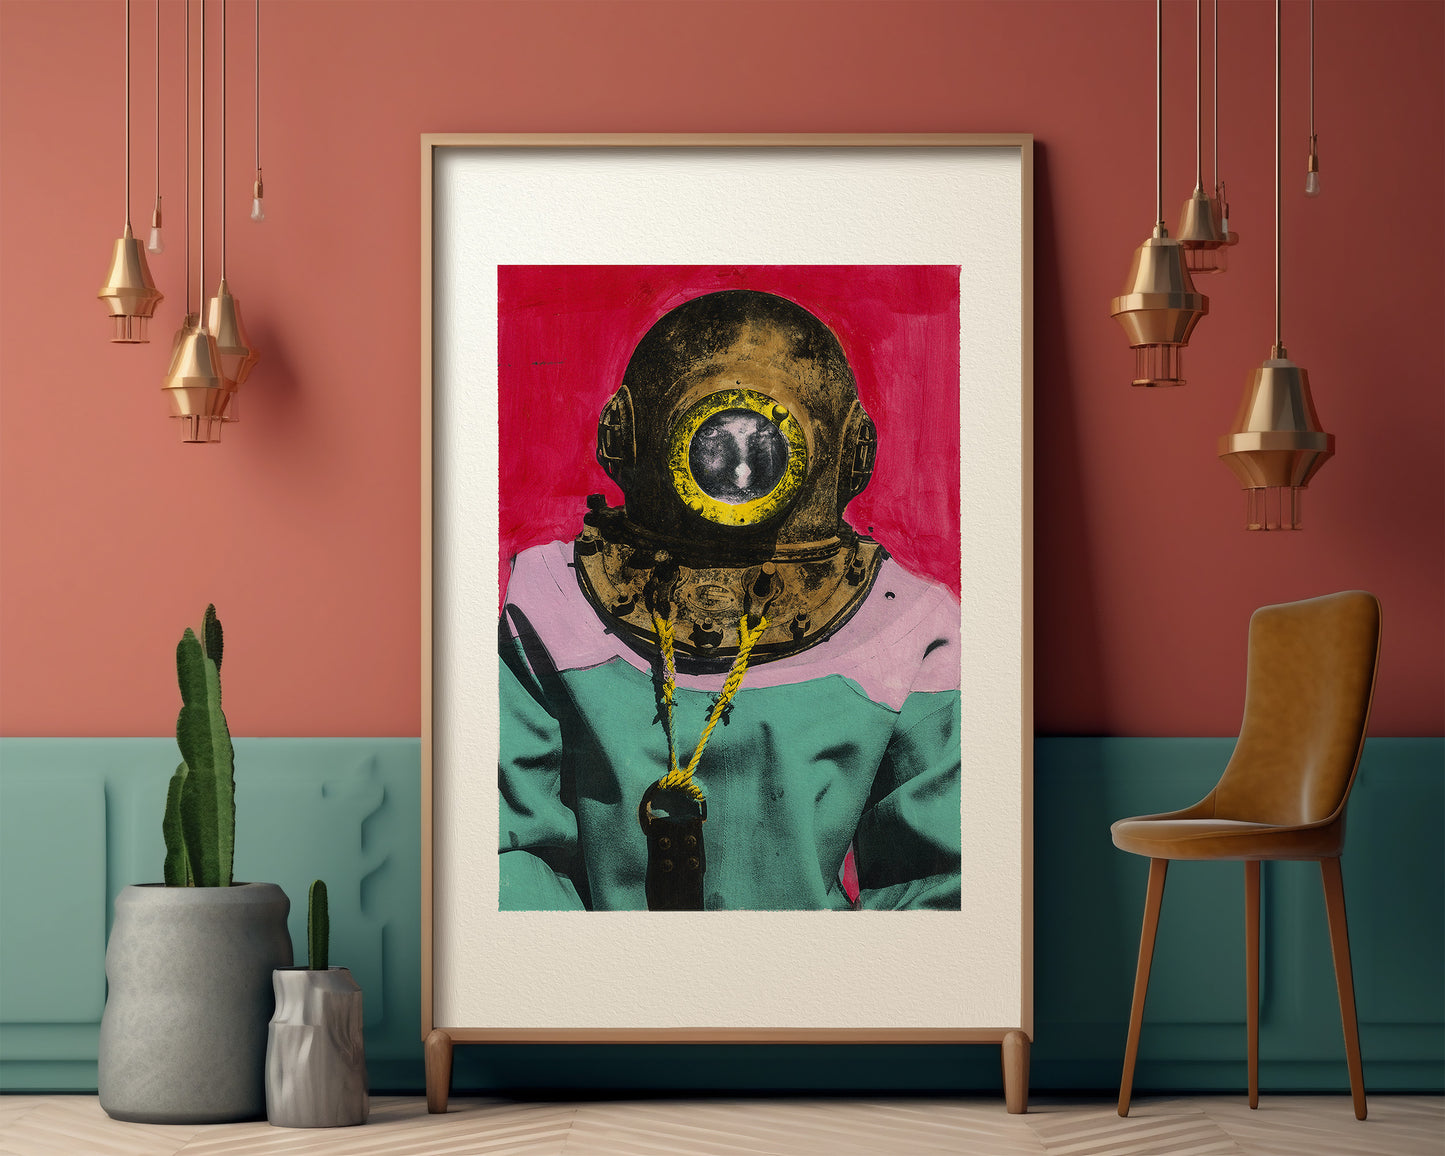 Painting Pop Art Wall Art from Greece | Red & Mauve sponge diver from Kalymnos island, by George Tatakis - inside an eclectic room